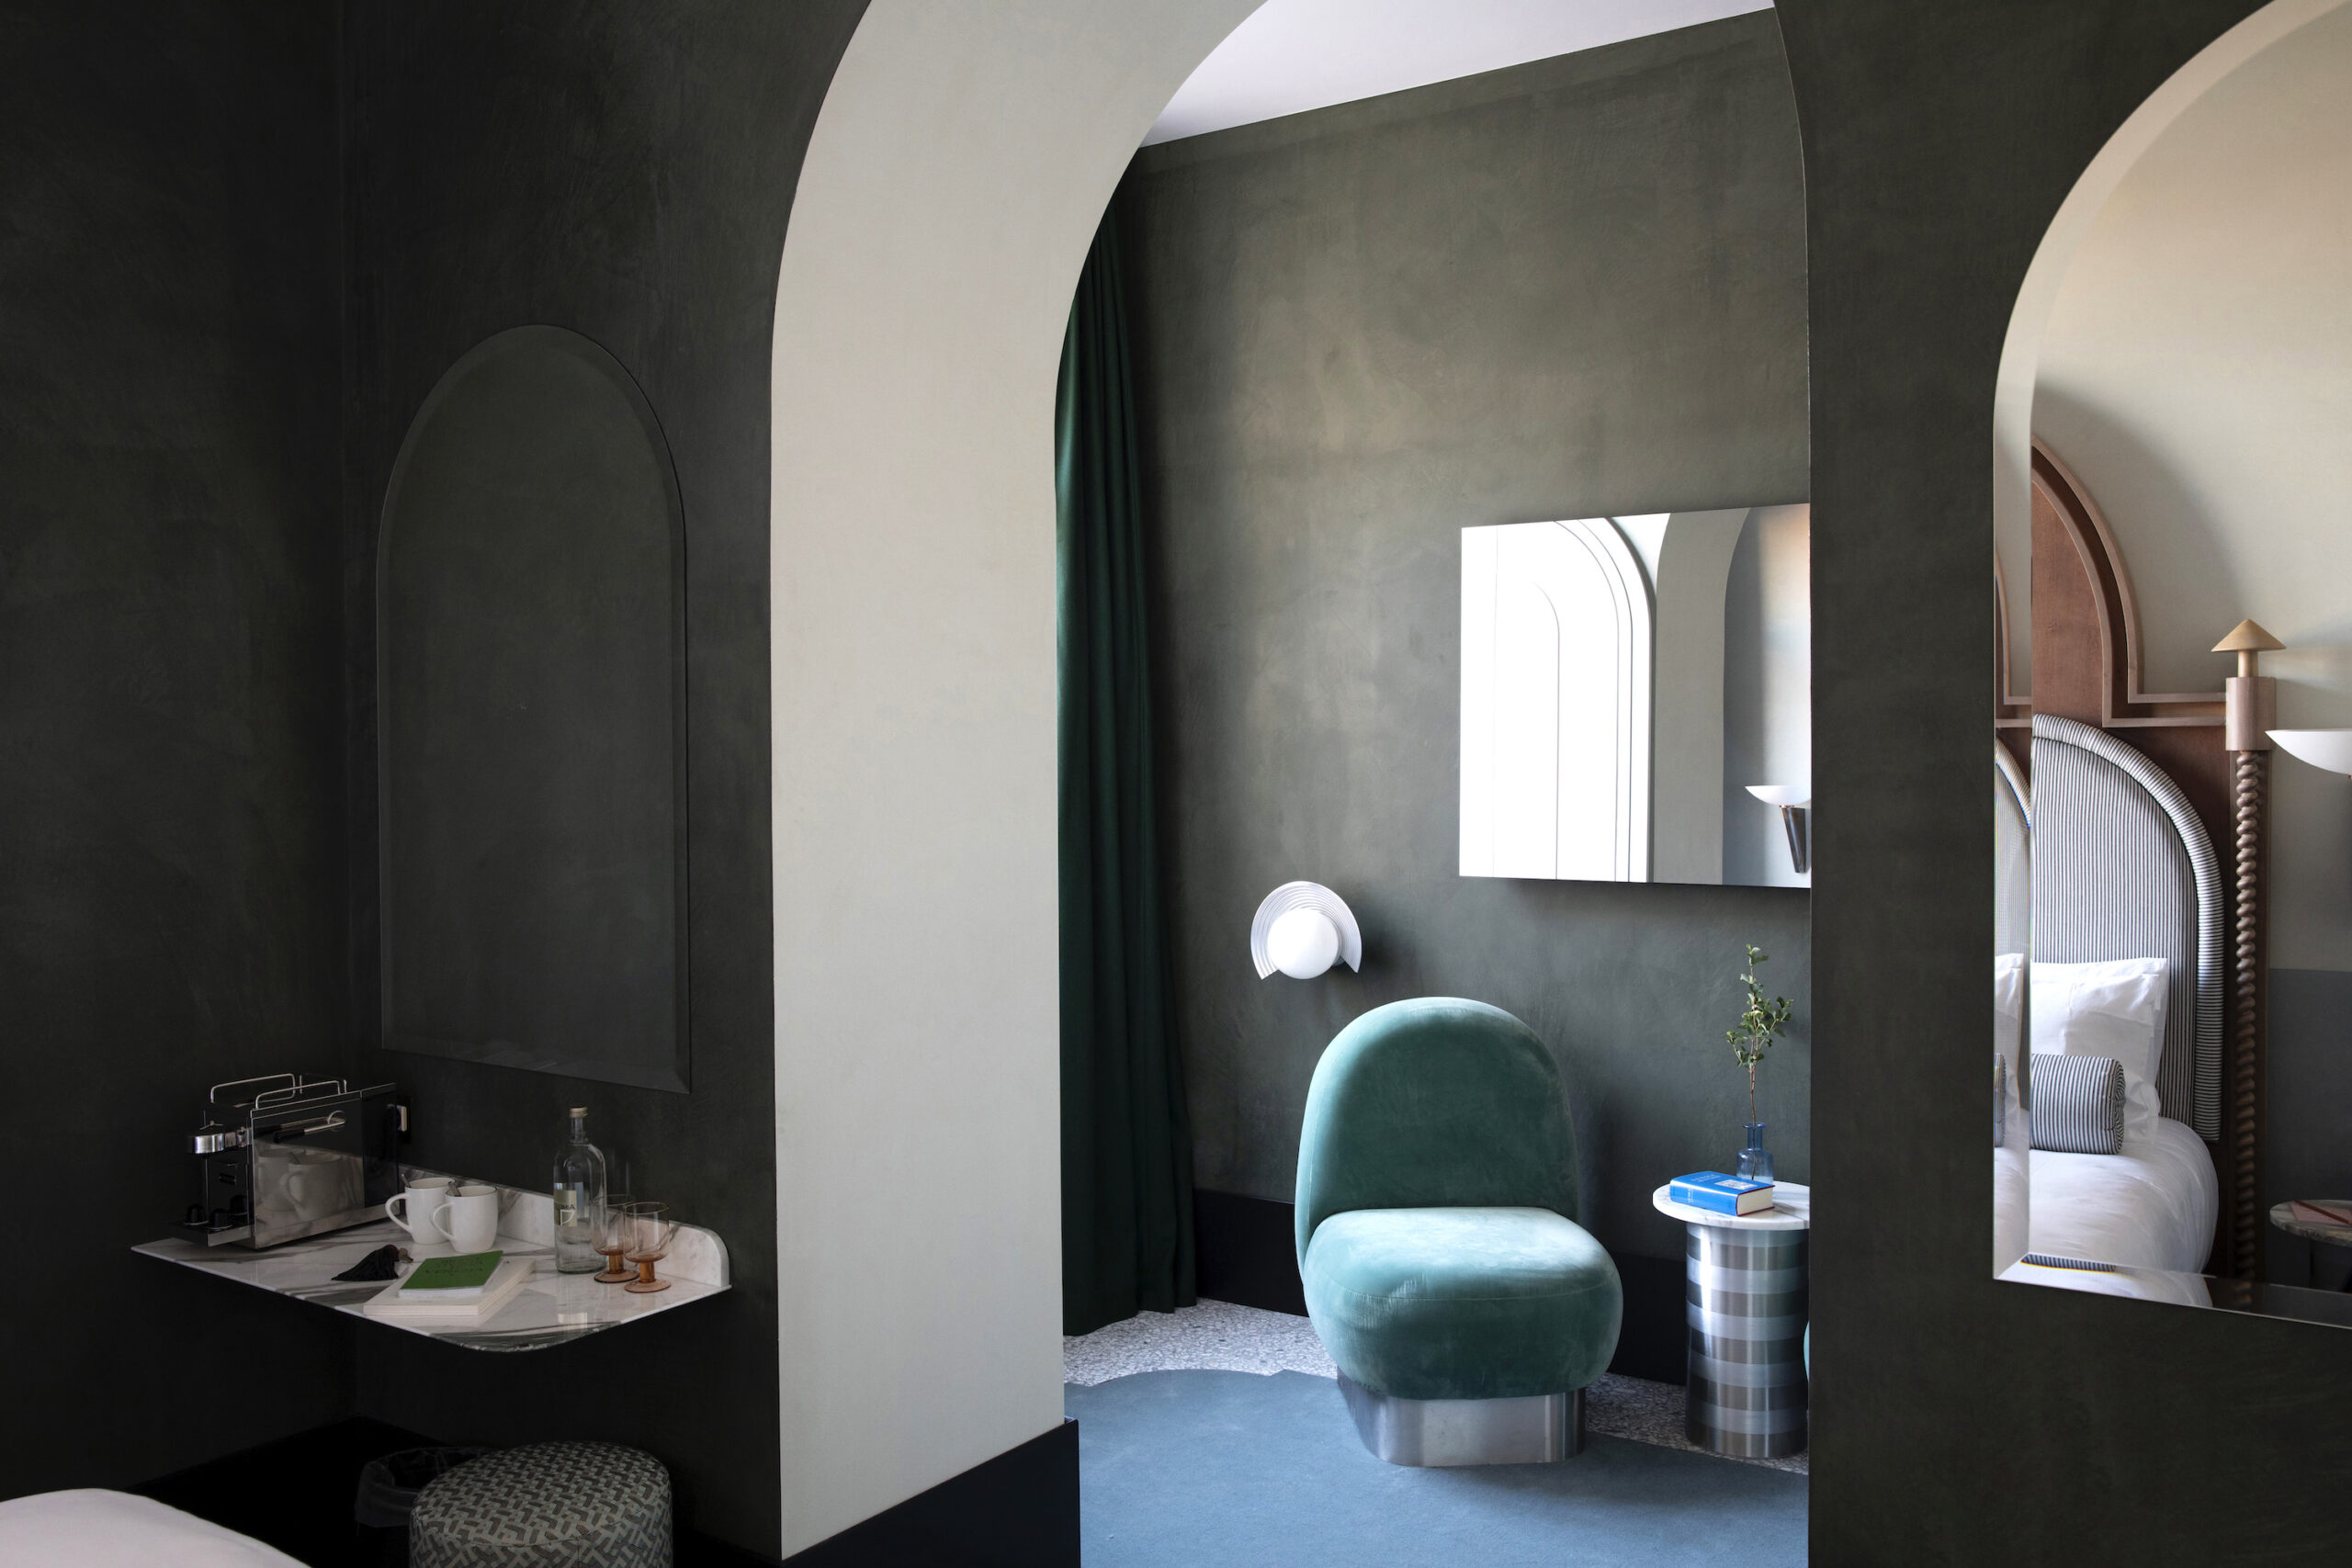 A suite at Il Palazzo Experimental Hotel, Venice, interior designed by Dorothée Meilichzon